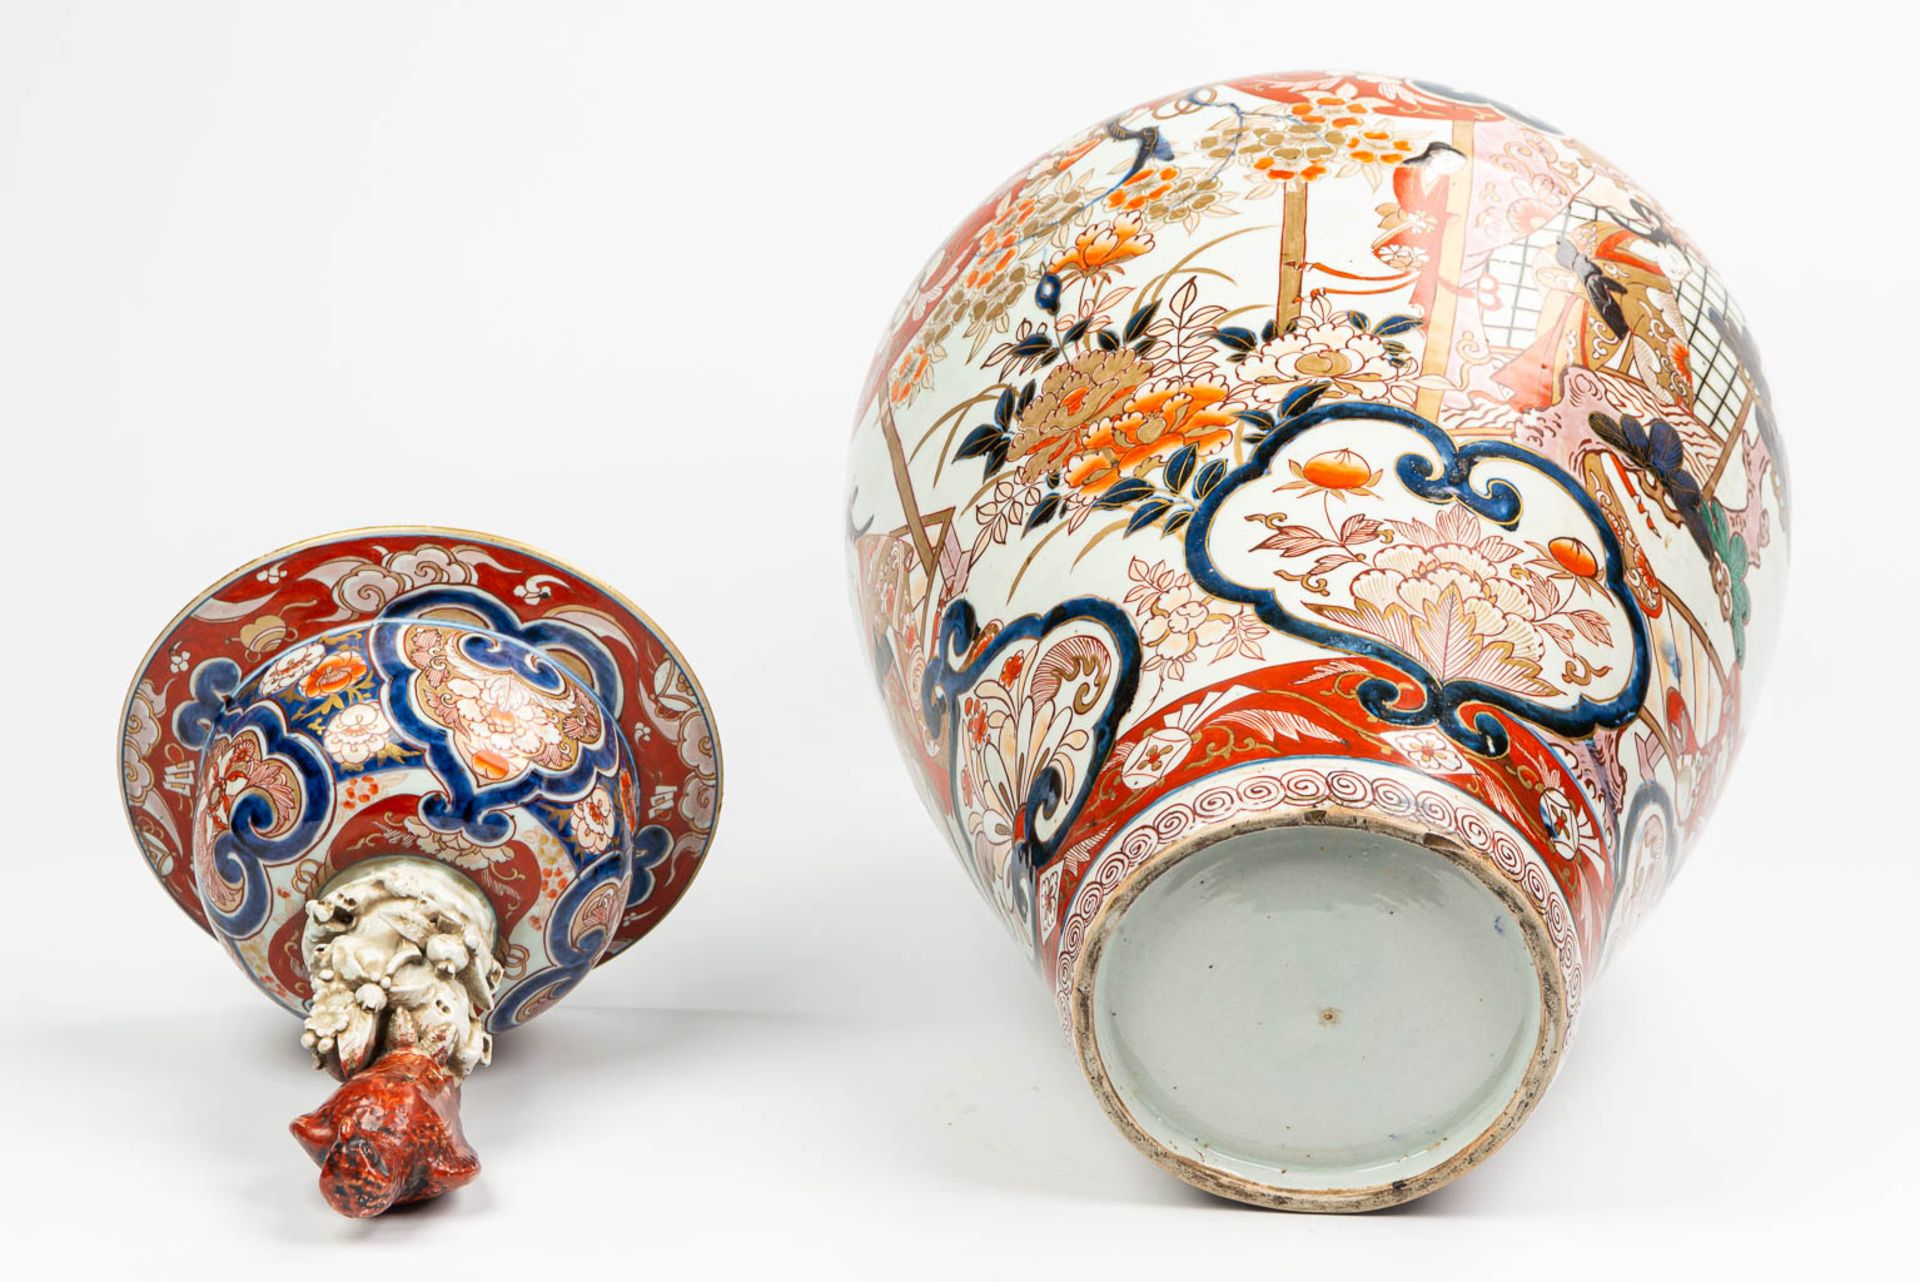 A large vase with lid made of Japanese porcelain in Imari - Image 12 of 16